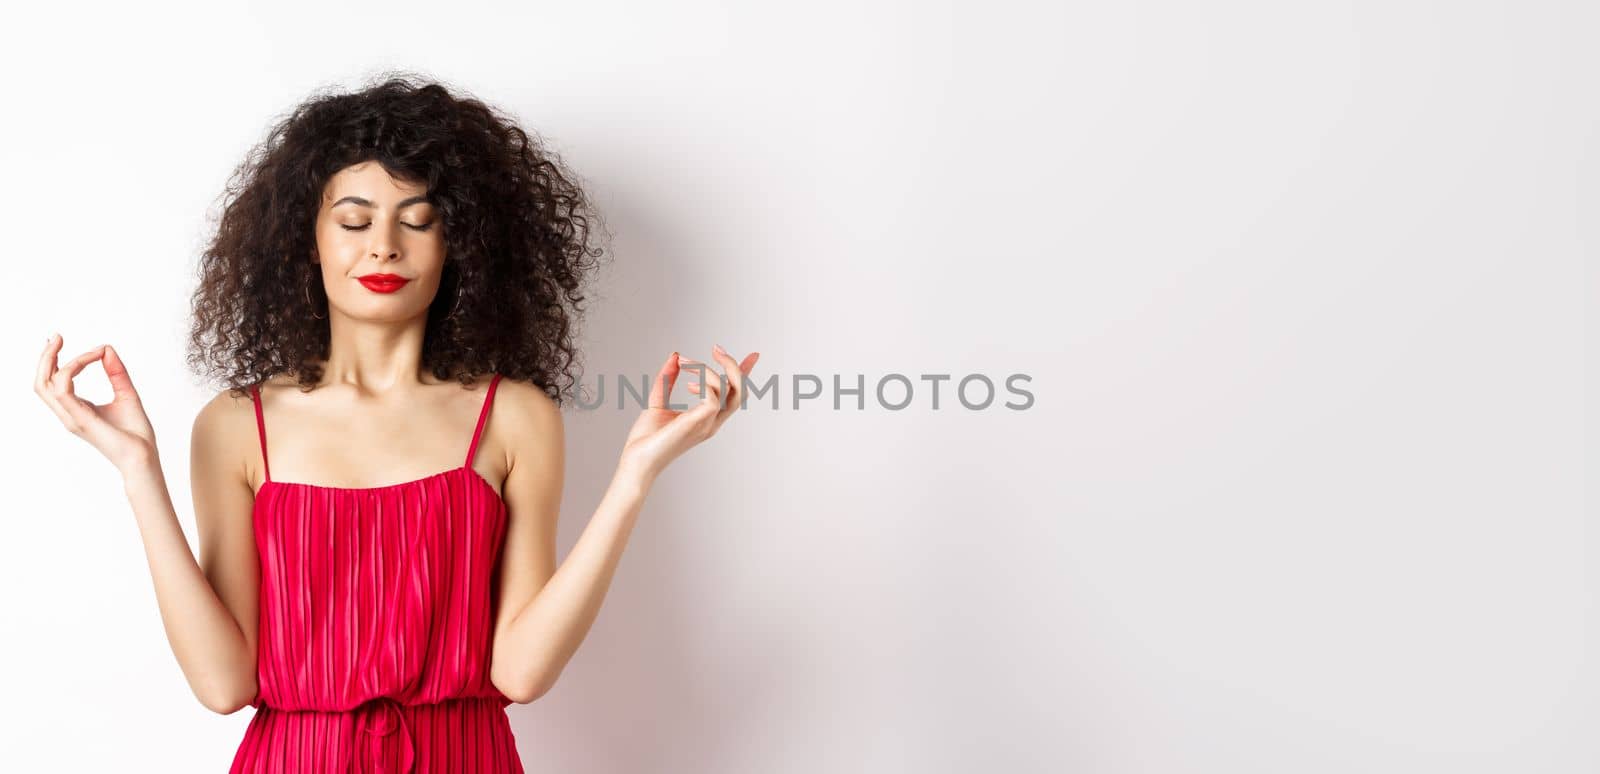 Calm and relaxed smiling woman in red dress, close eyes and meditating, practice yoga in zen pose, standing on white background.